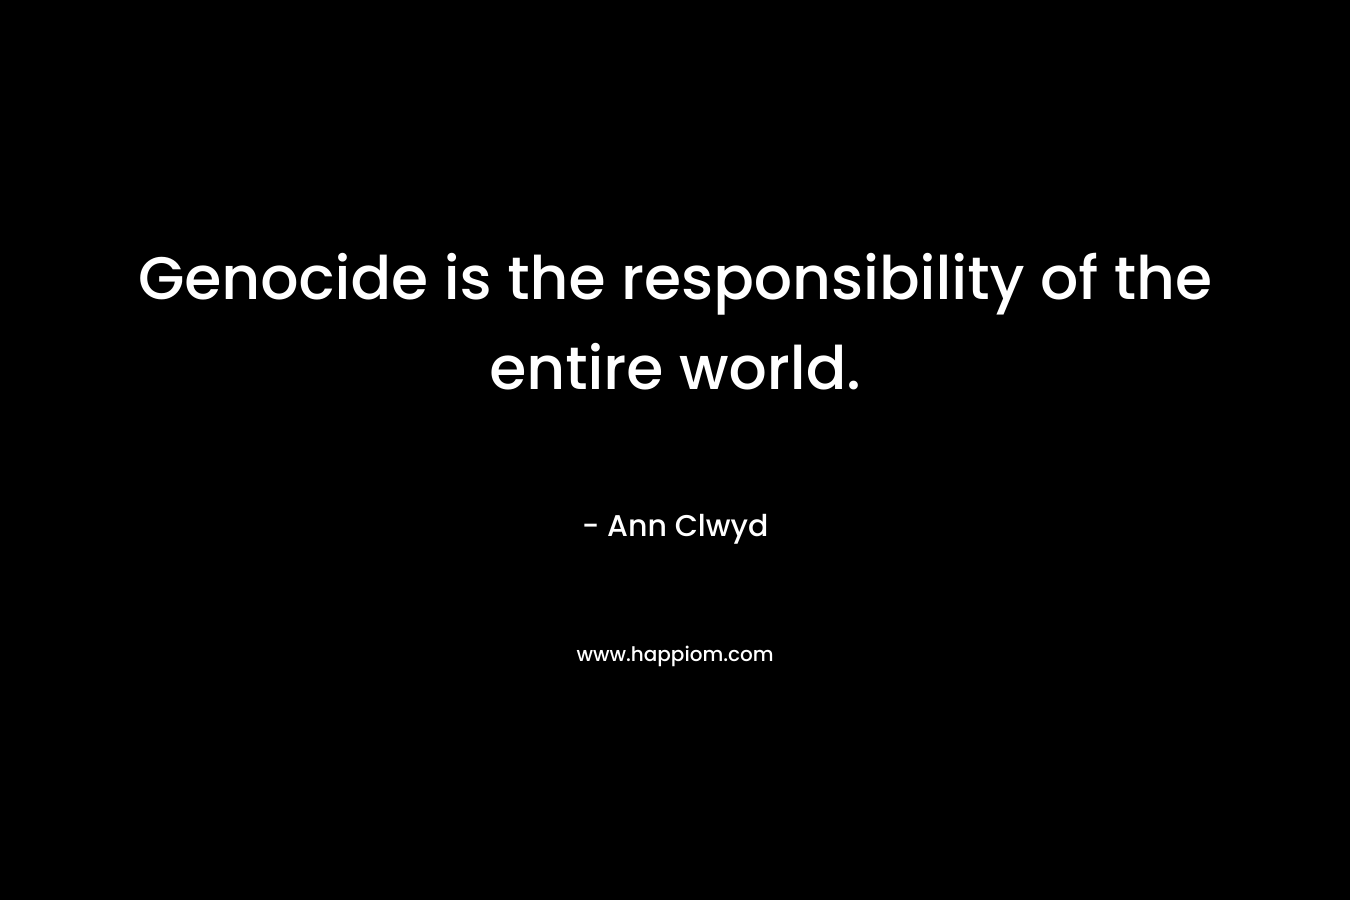 Genocide is the responsibility of the entire world.